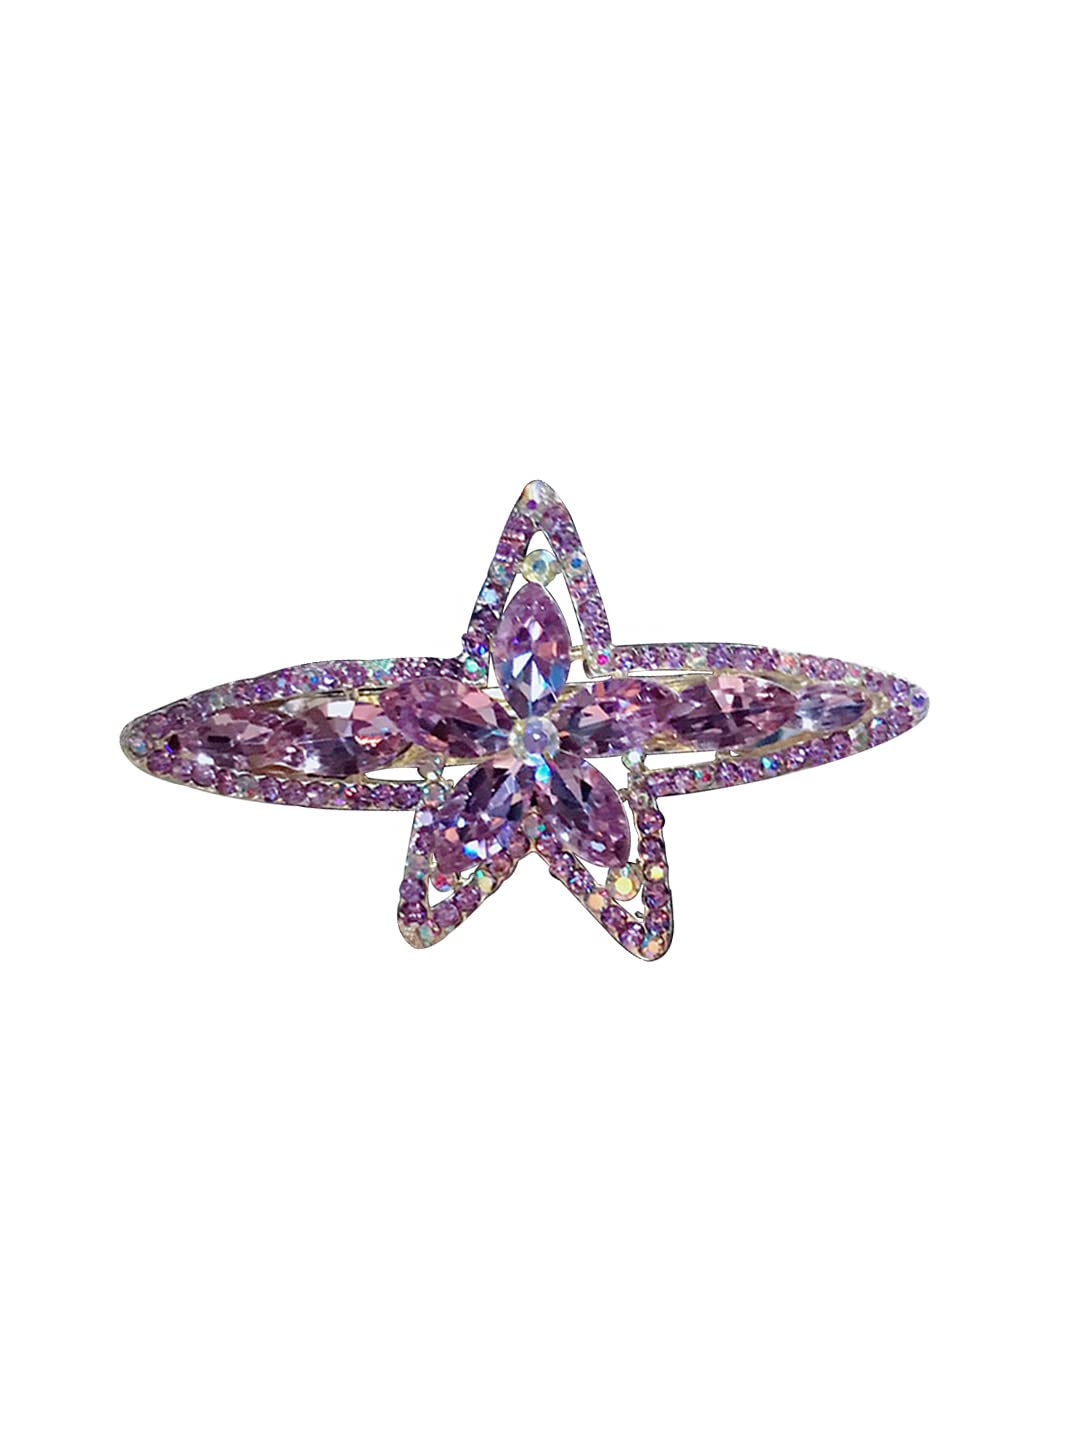 Yellow Chimes Hair Clips for Women Hair Barrette Clips Purple Crystal Star Hairclips French Barrette for Girls and Women Hair Accessories.